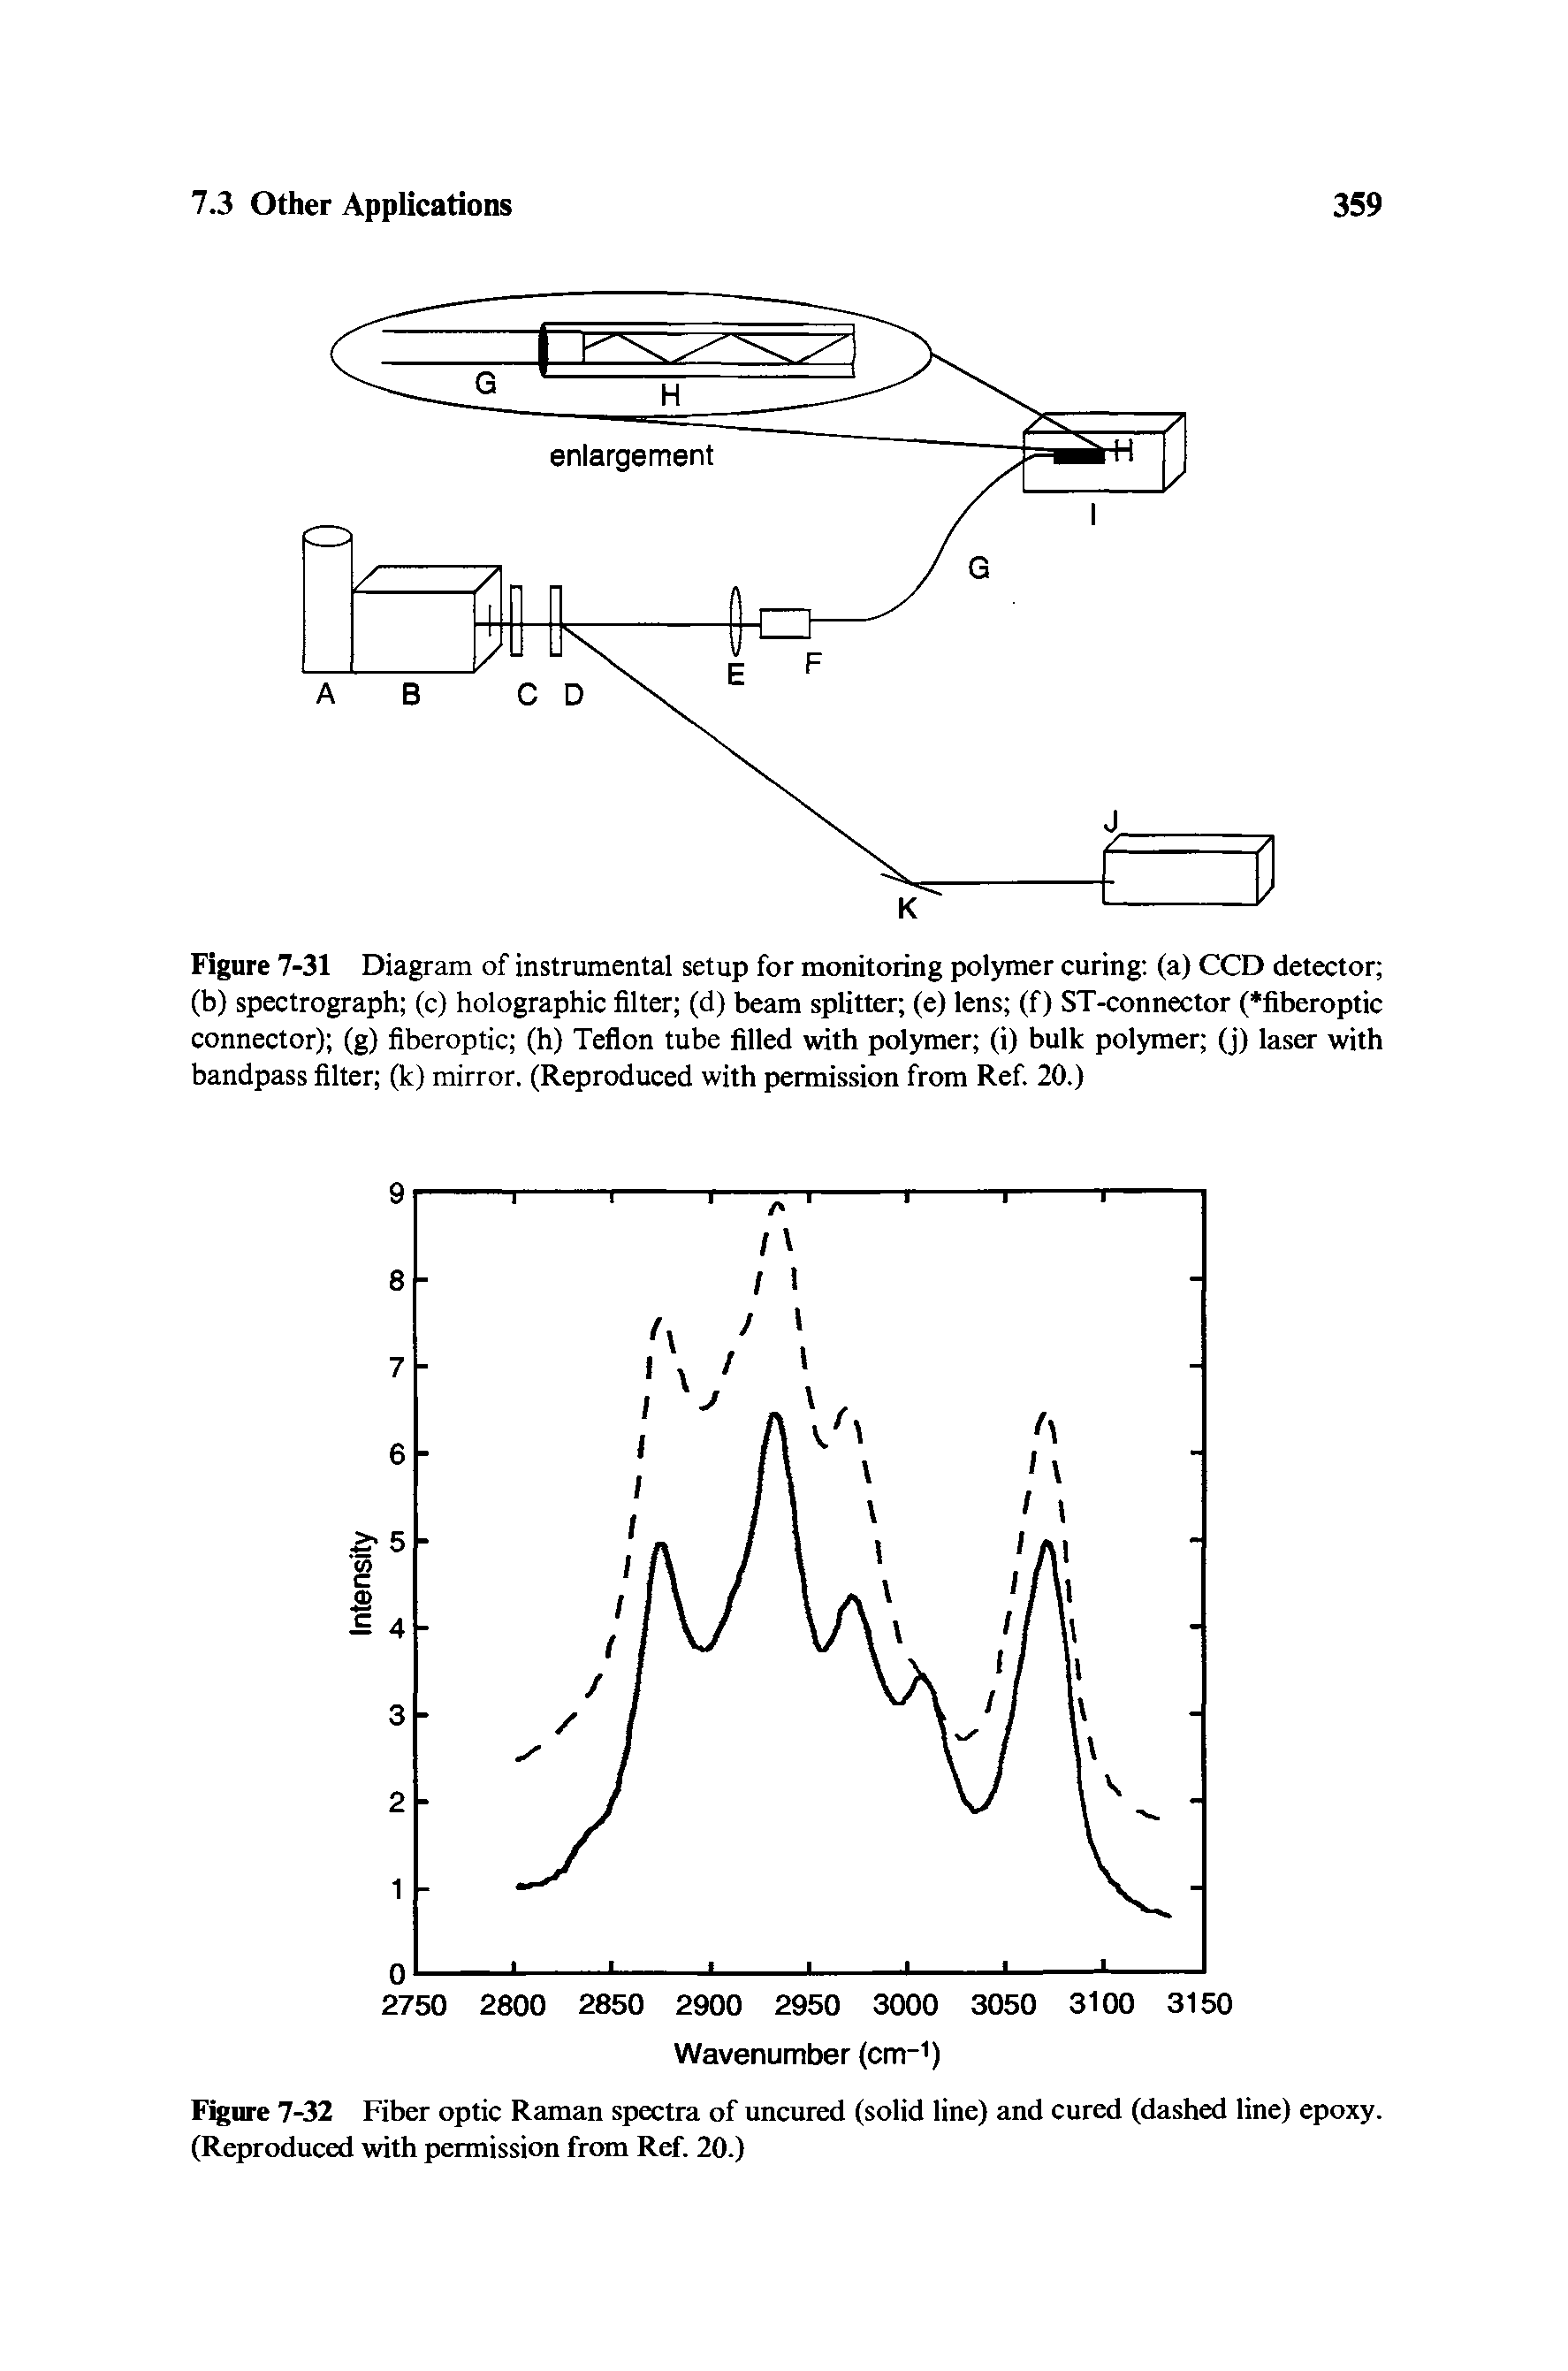 Figure 7-32 Fiber optic Raman spectra of uncured (solid line) and cured (dashed line) epoxy. (Reproduced with permission from Ref. 20.)...